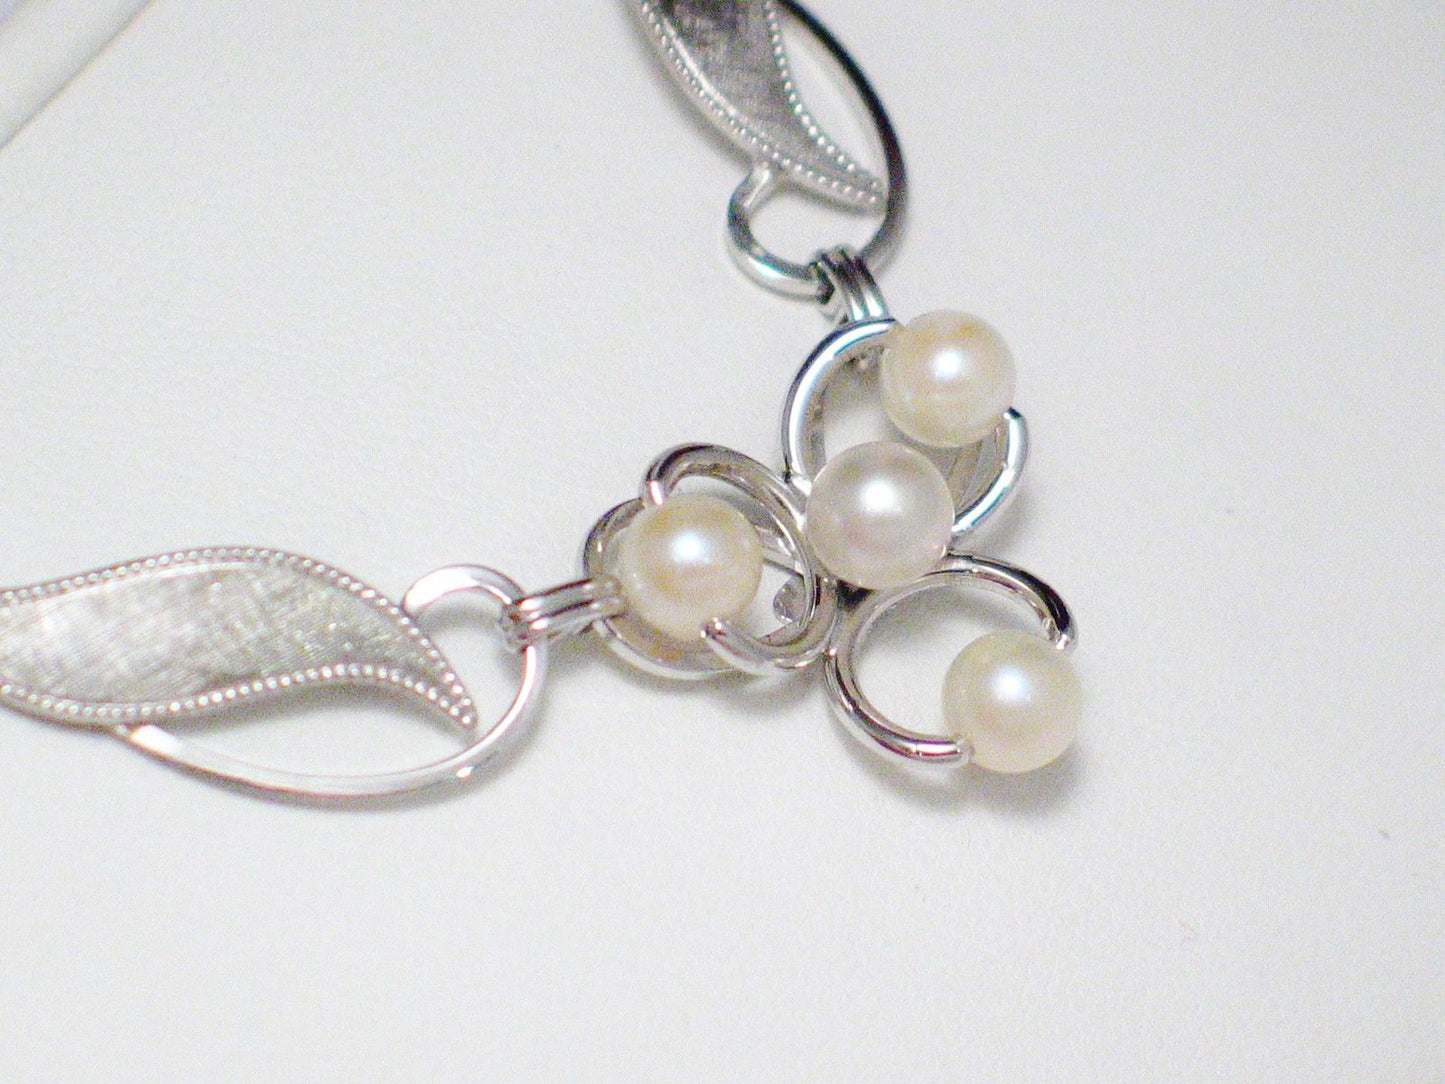 Pearl Necklace, Womens Sterling Silver Fancy Formal Style Pearl Necklace - Blingschlingers Jewelry